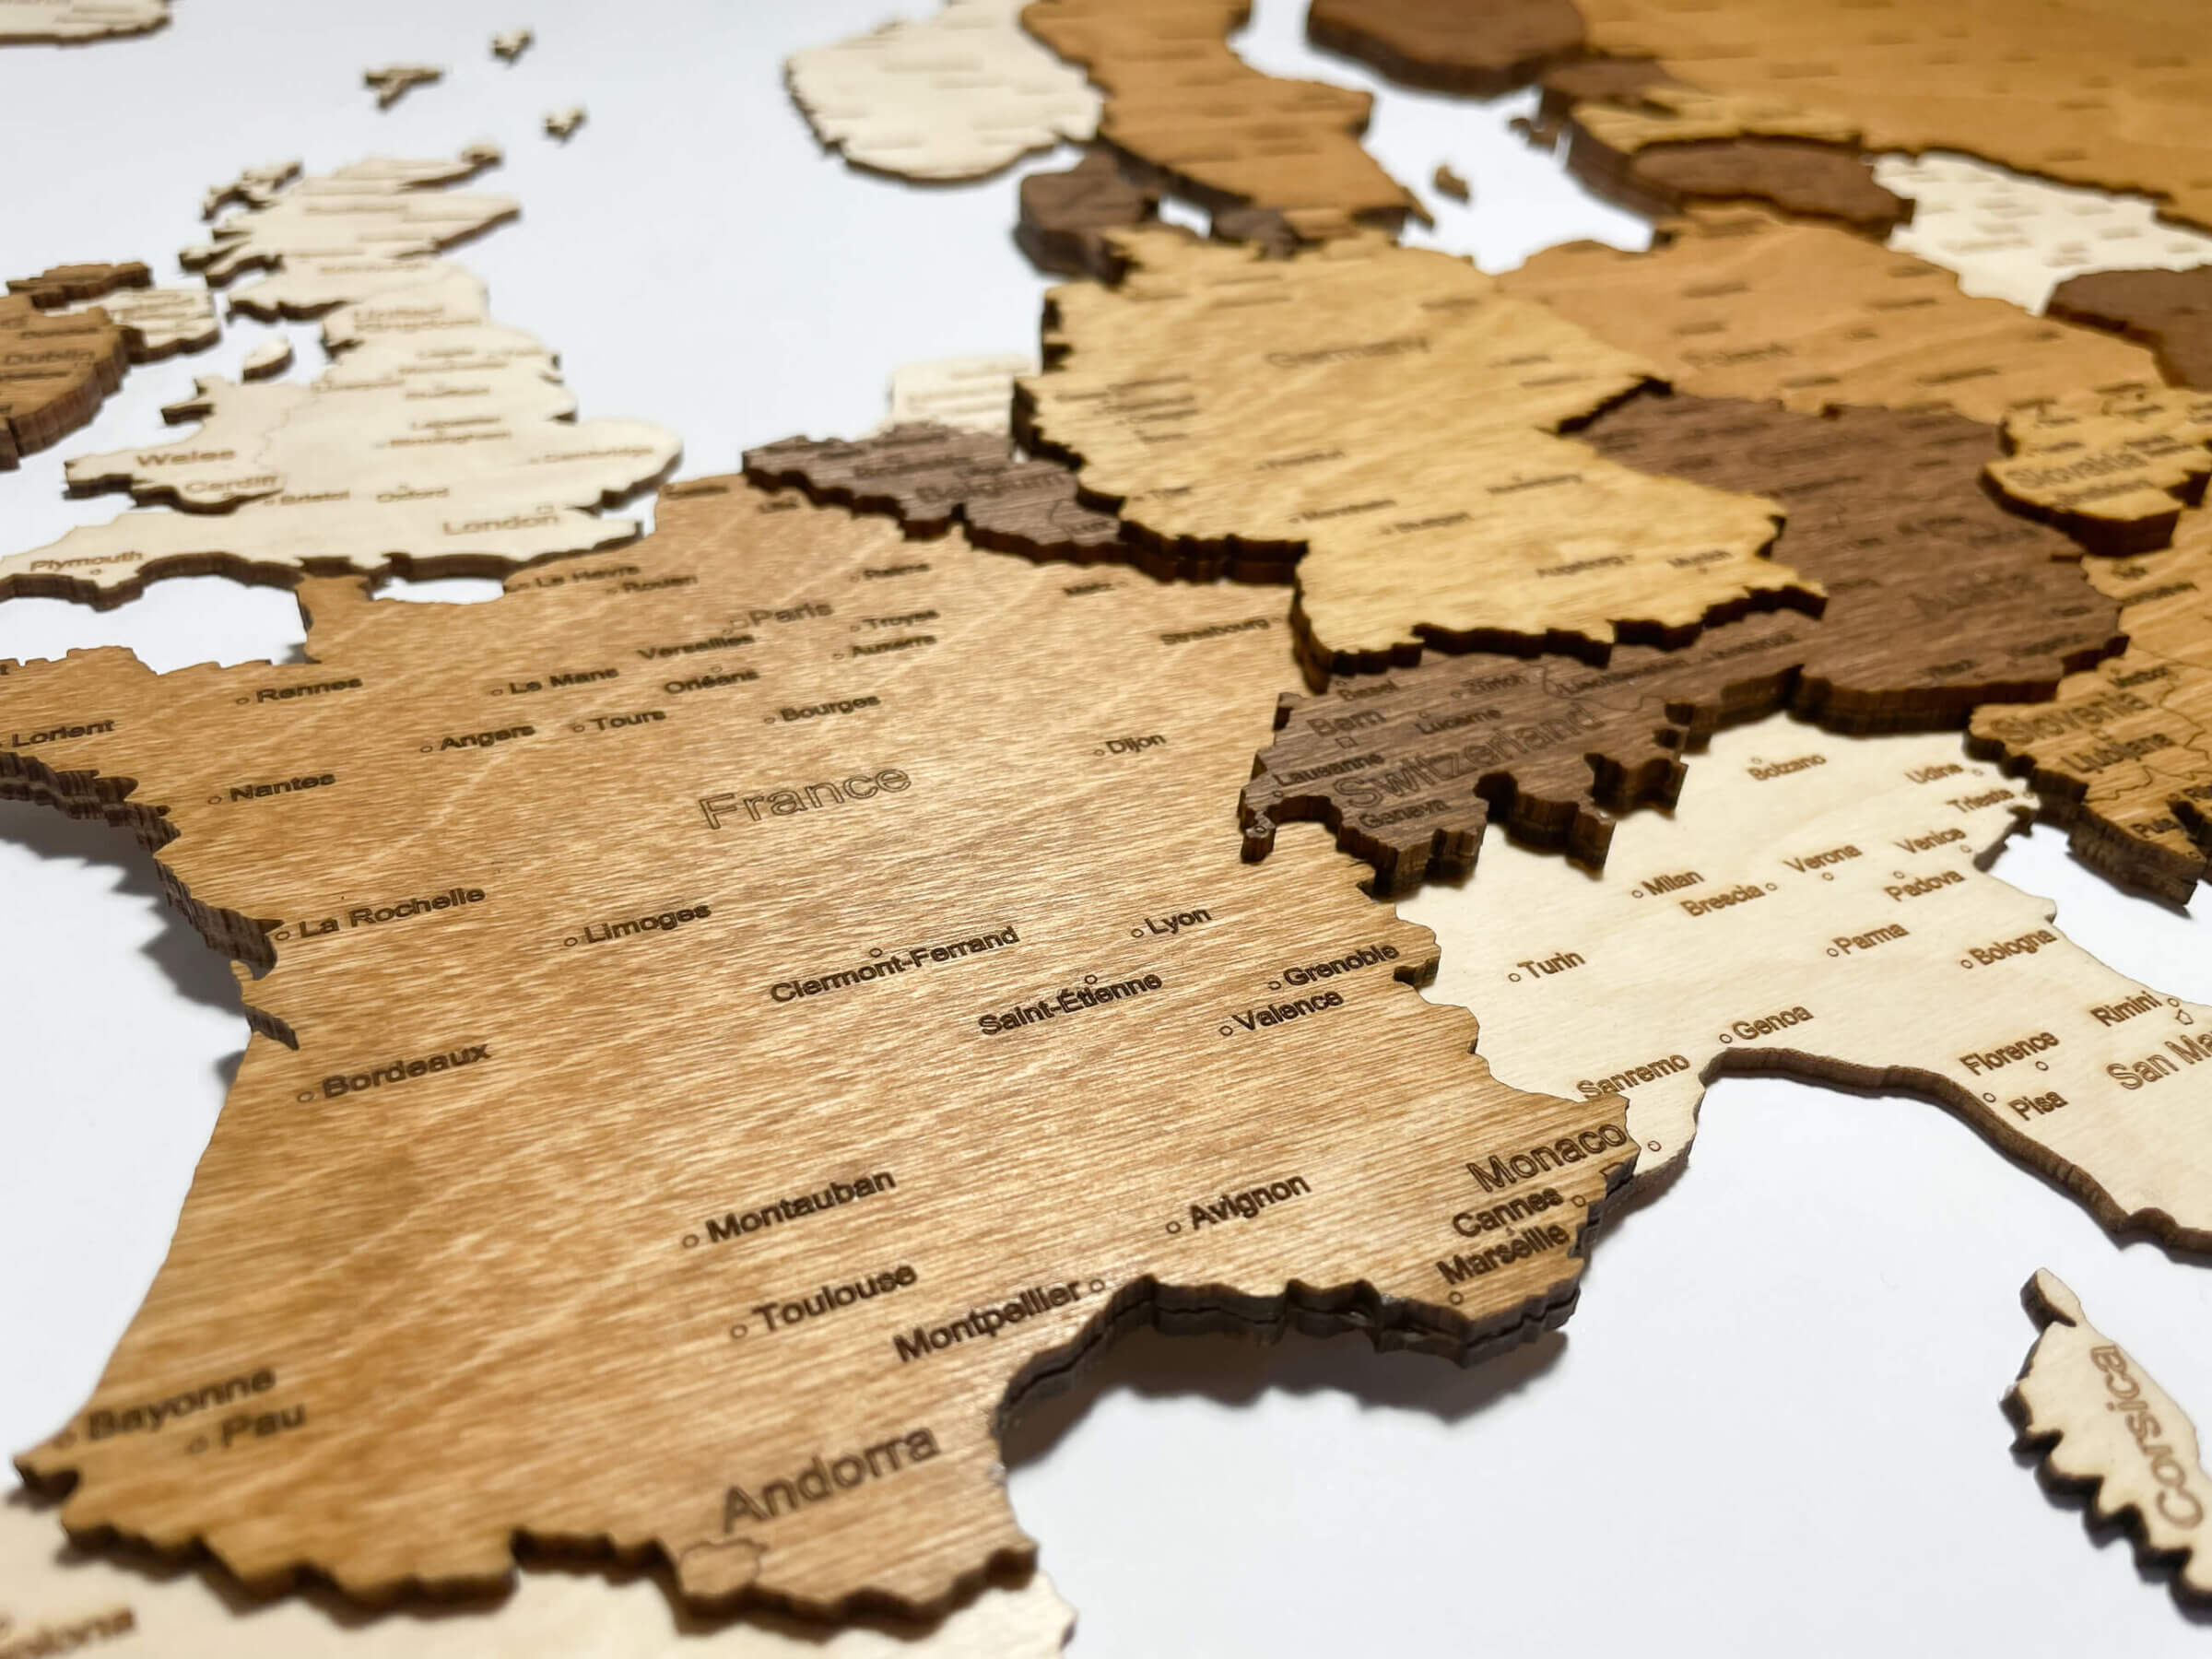 France - 3D Wooden Map of Europe